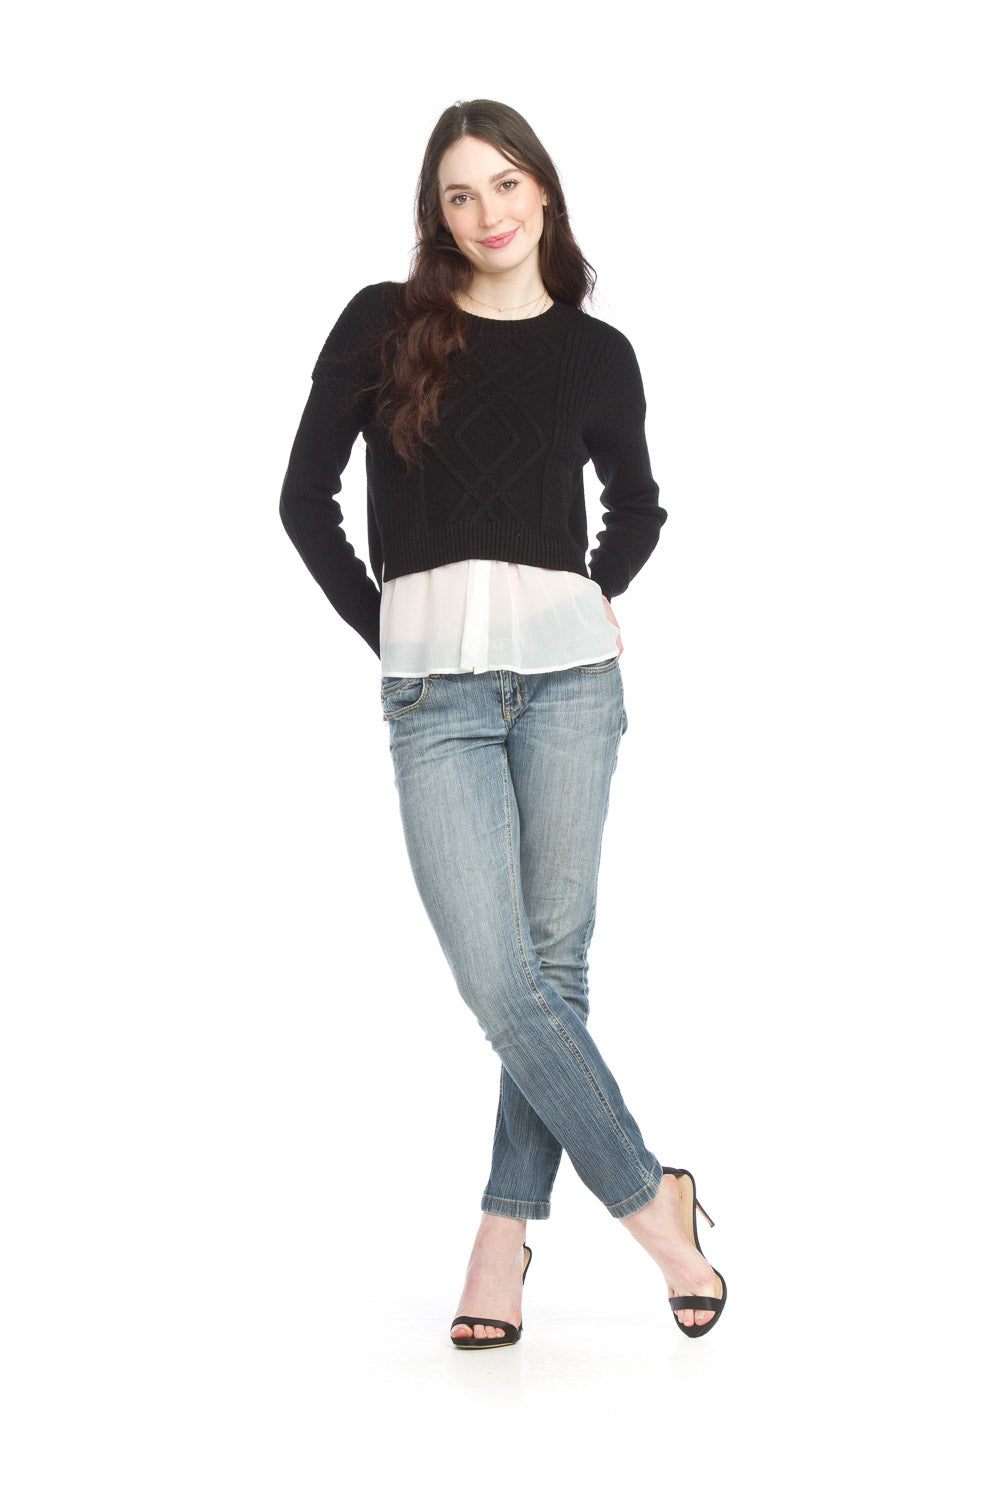 ST-15290 - Black - Cable Knit Crop Sweater with Georgette Underlay